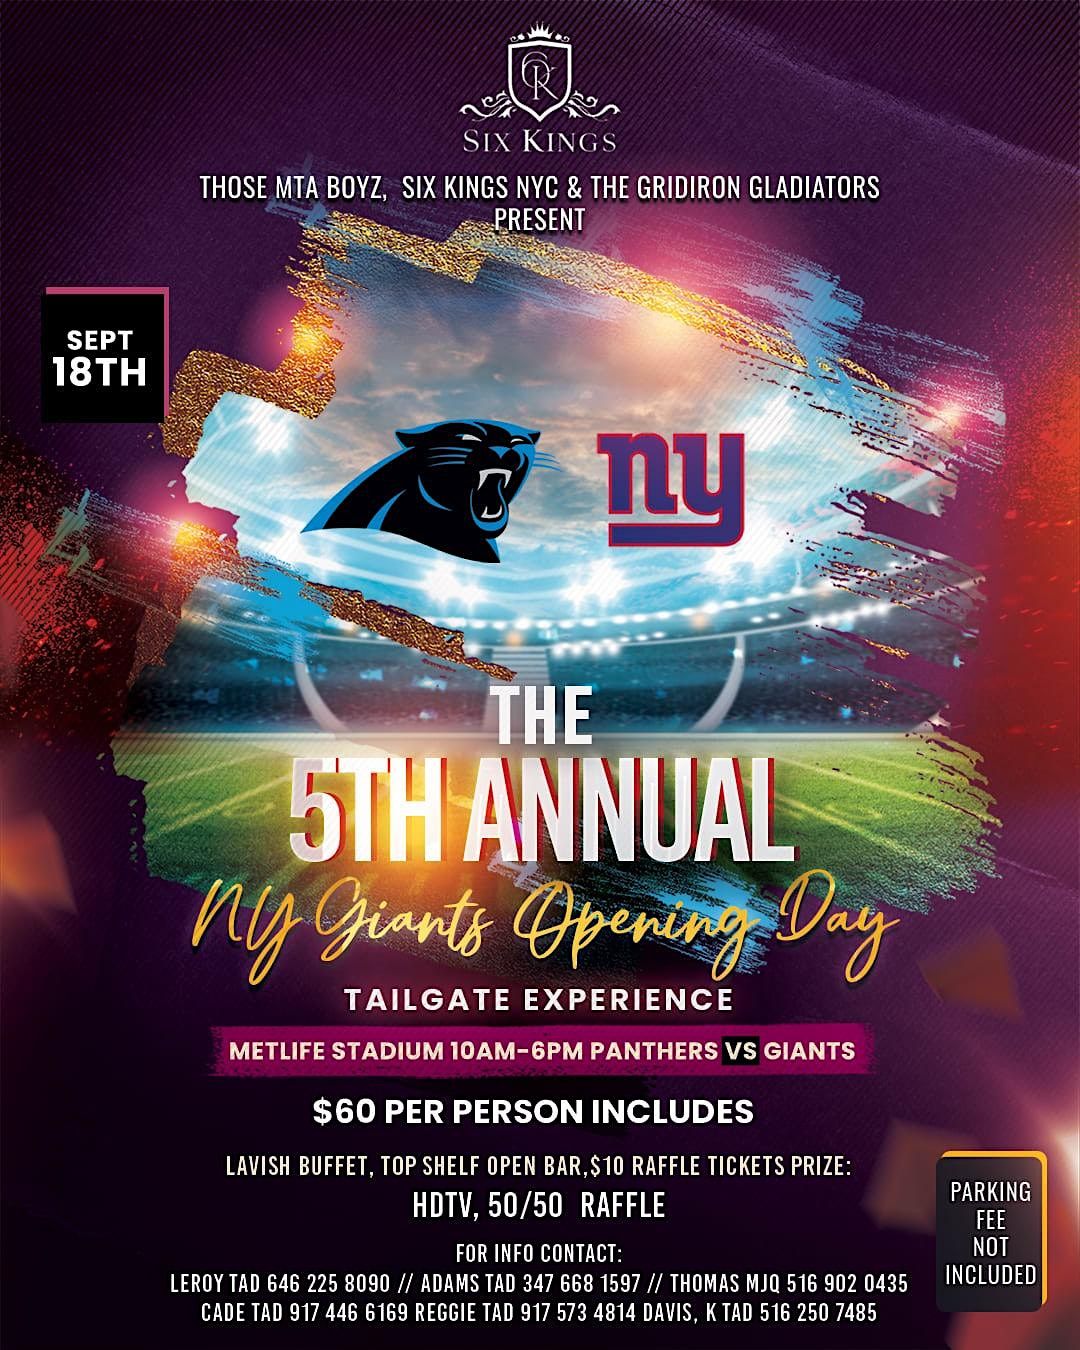 The 5th Annual NY Giants Opening Day Tailgate Experience MetLife